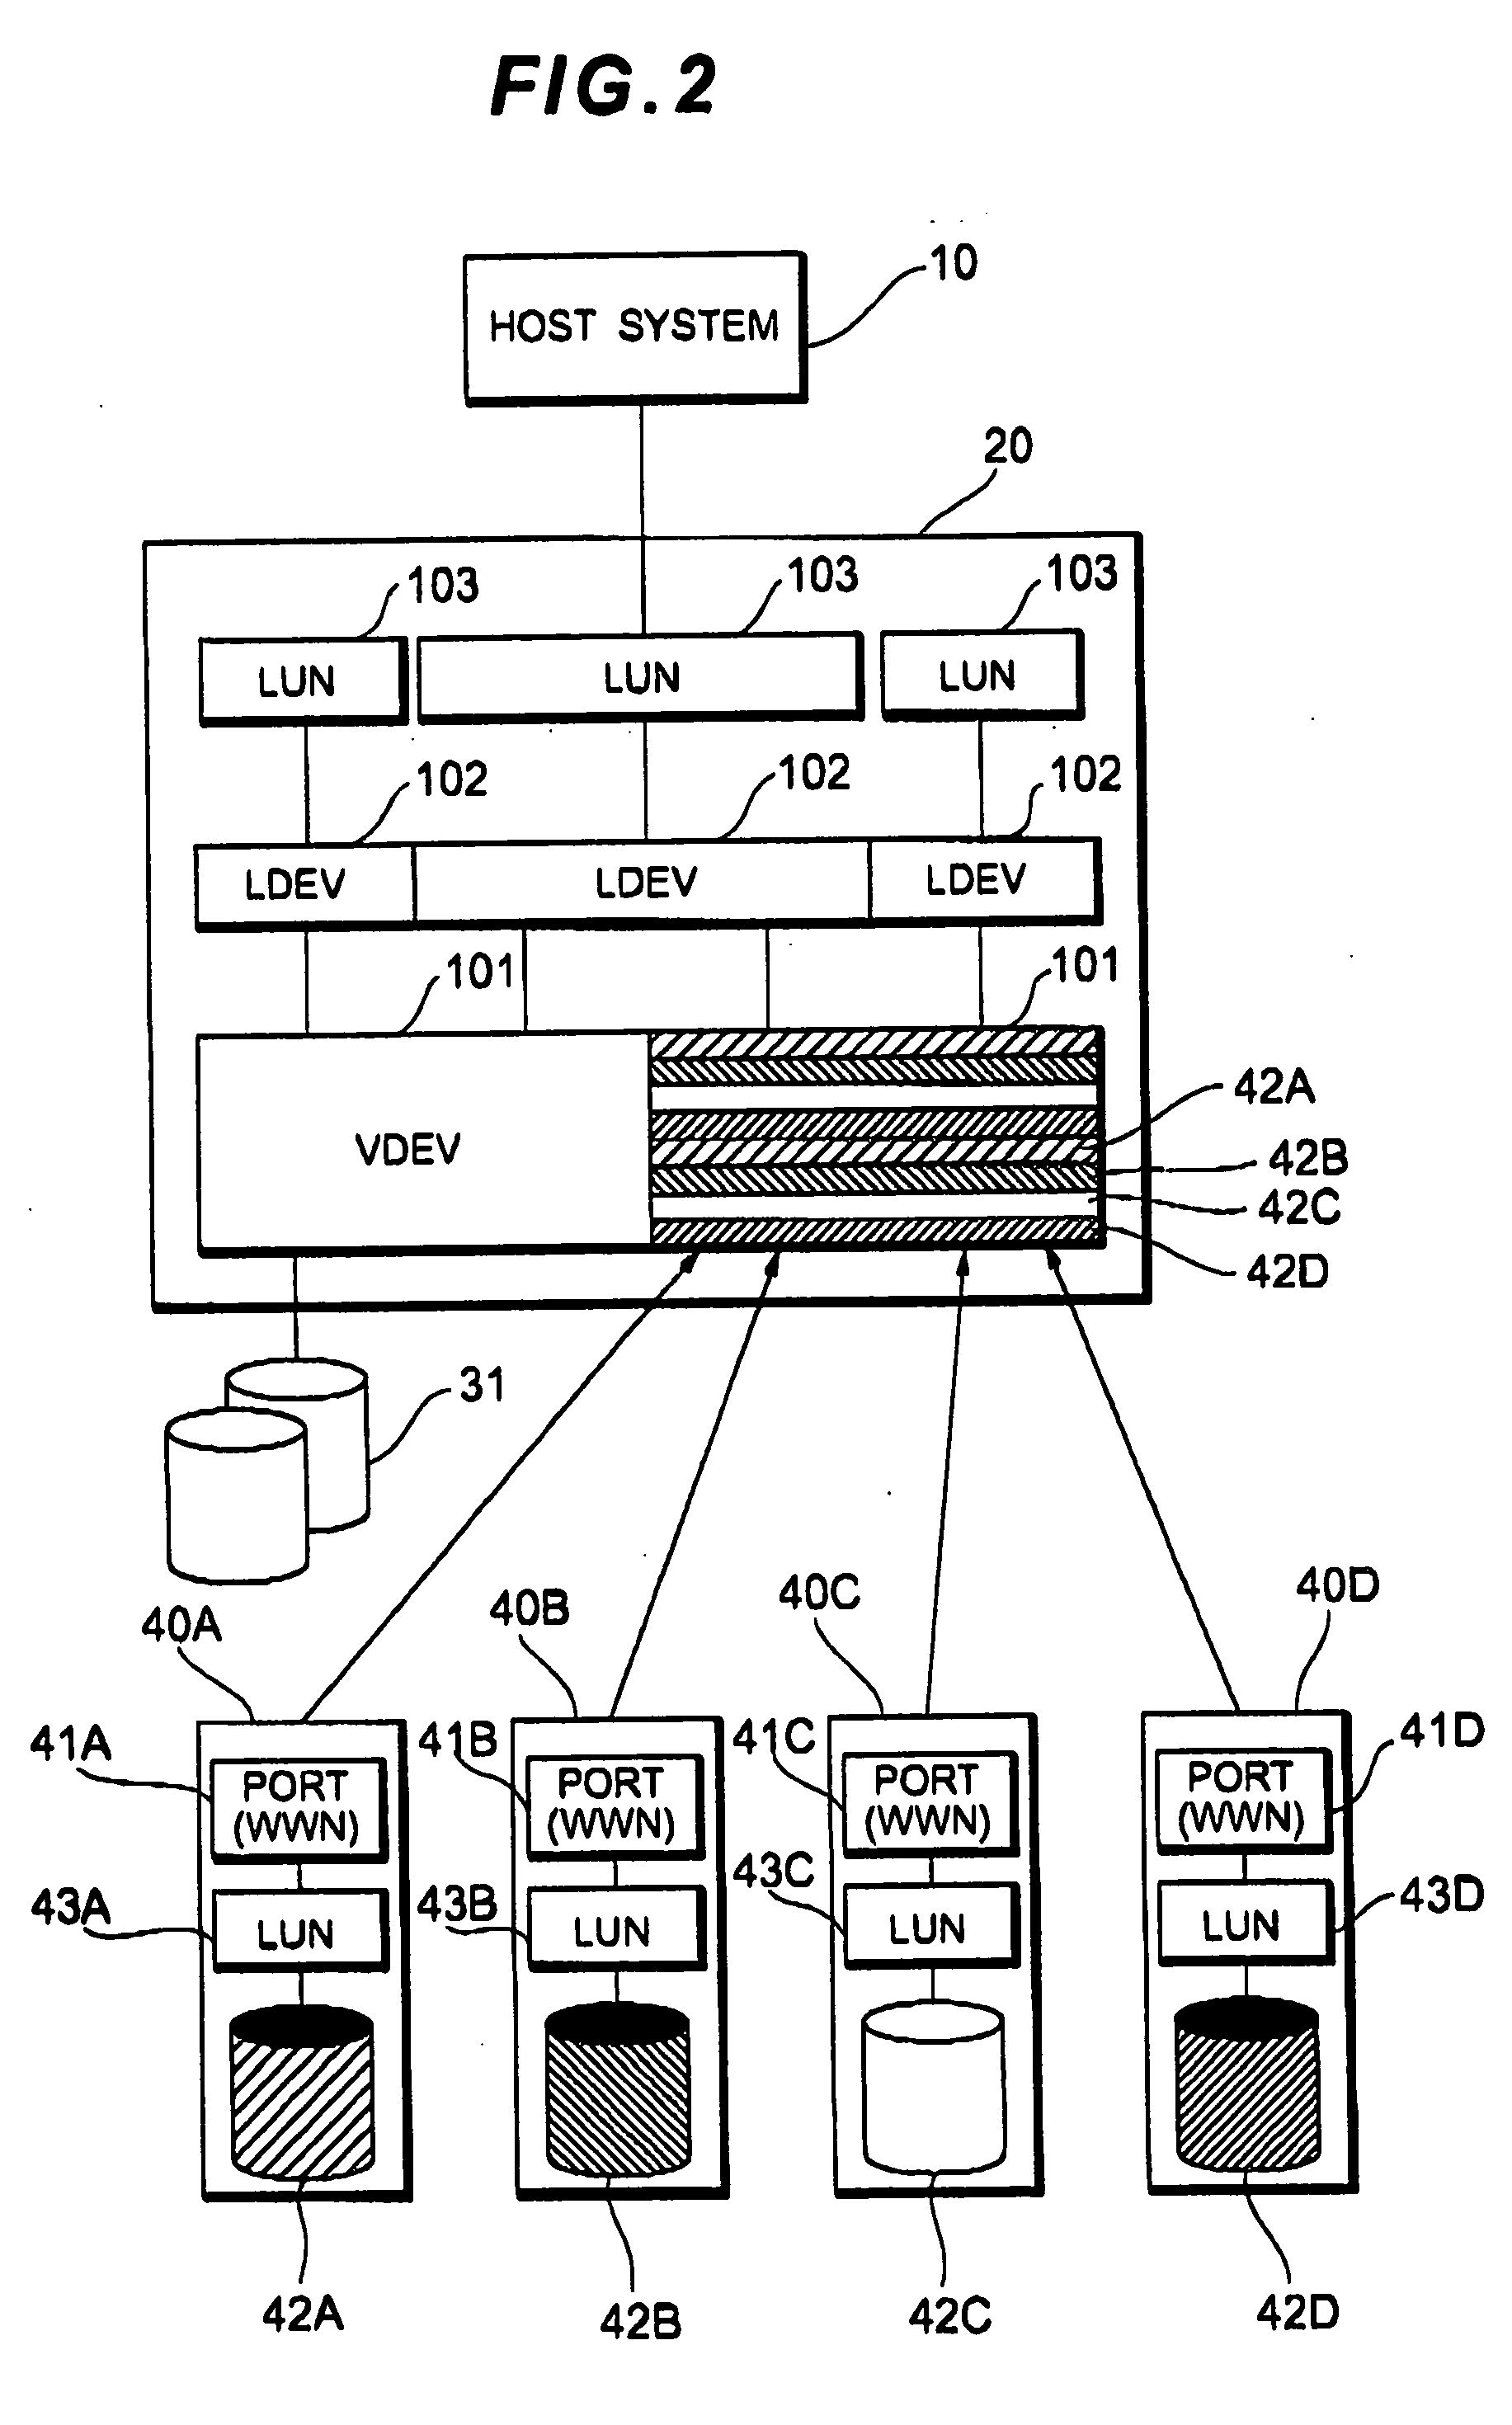 Storage controller and storage system